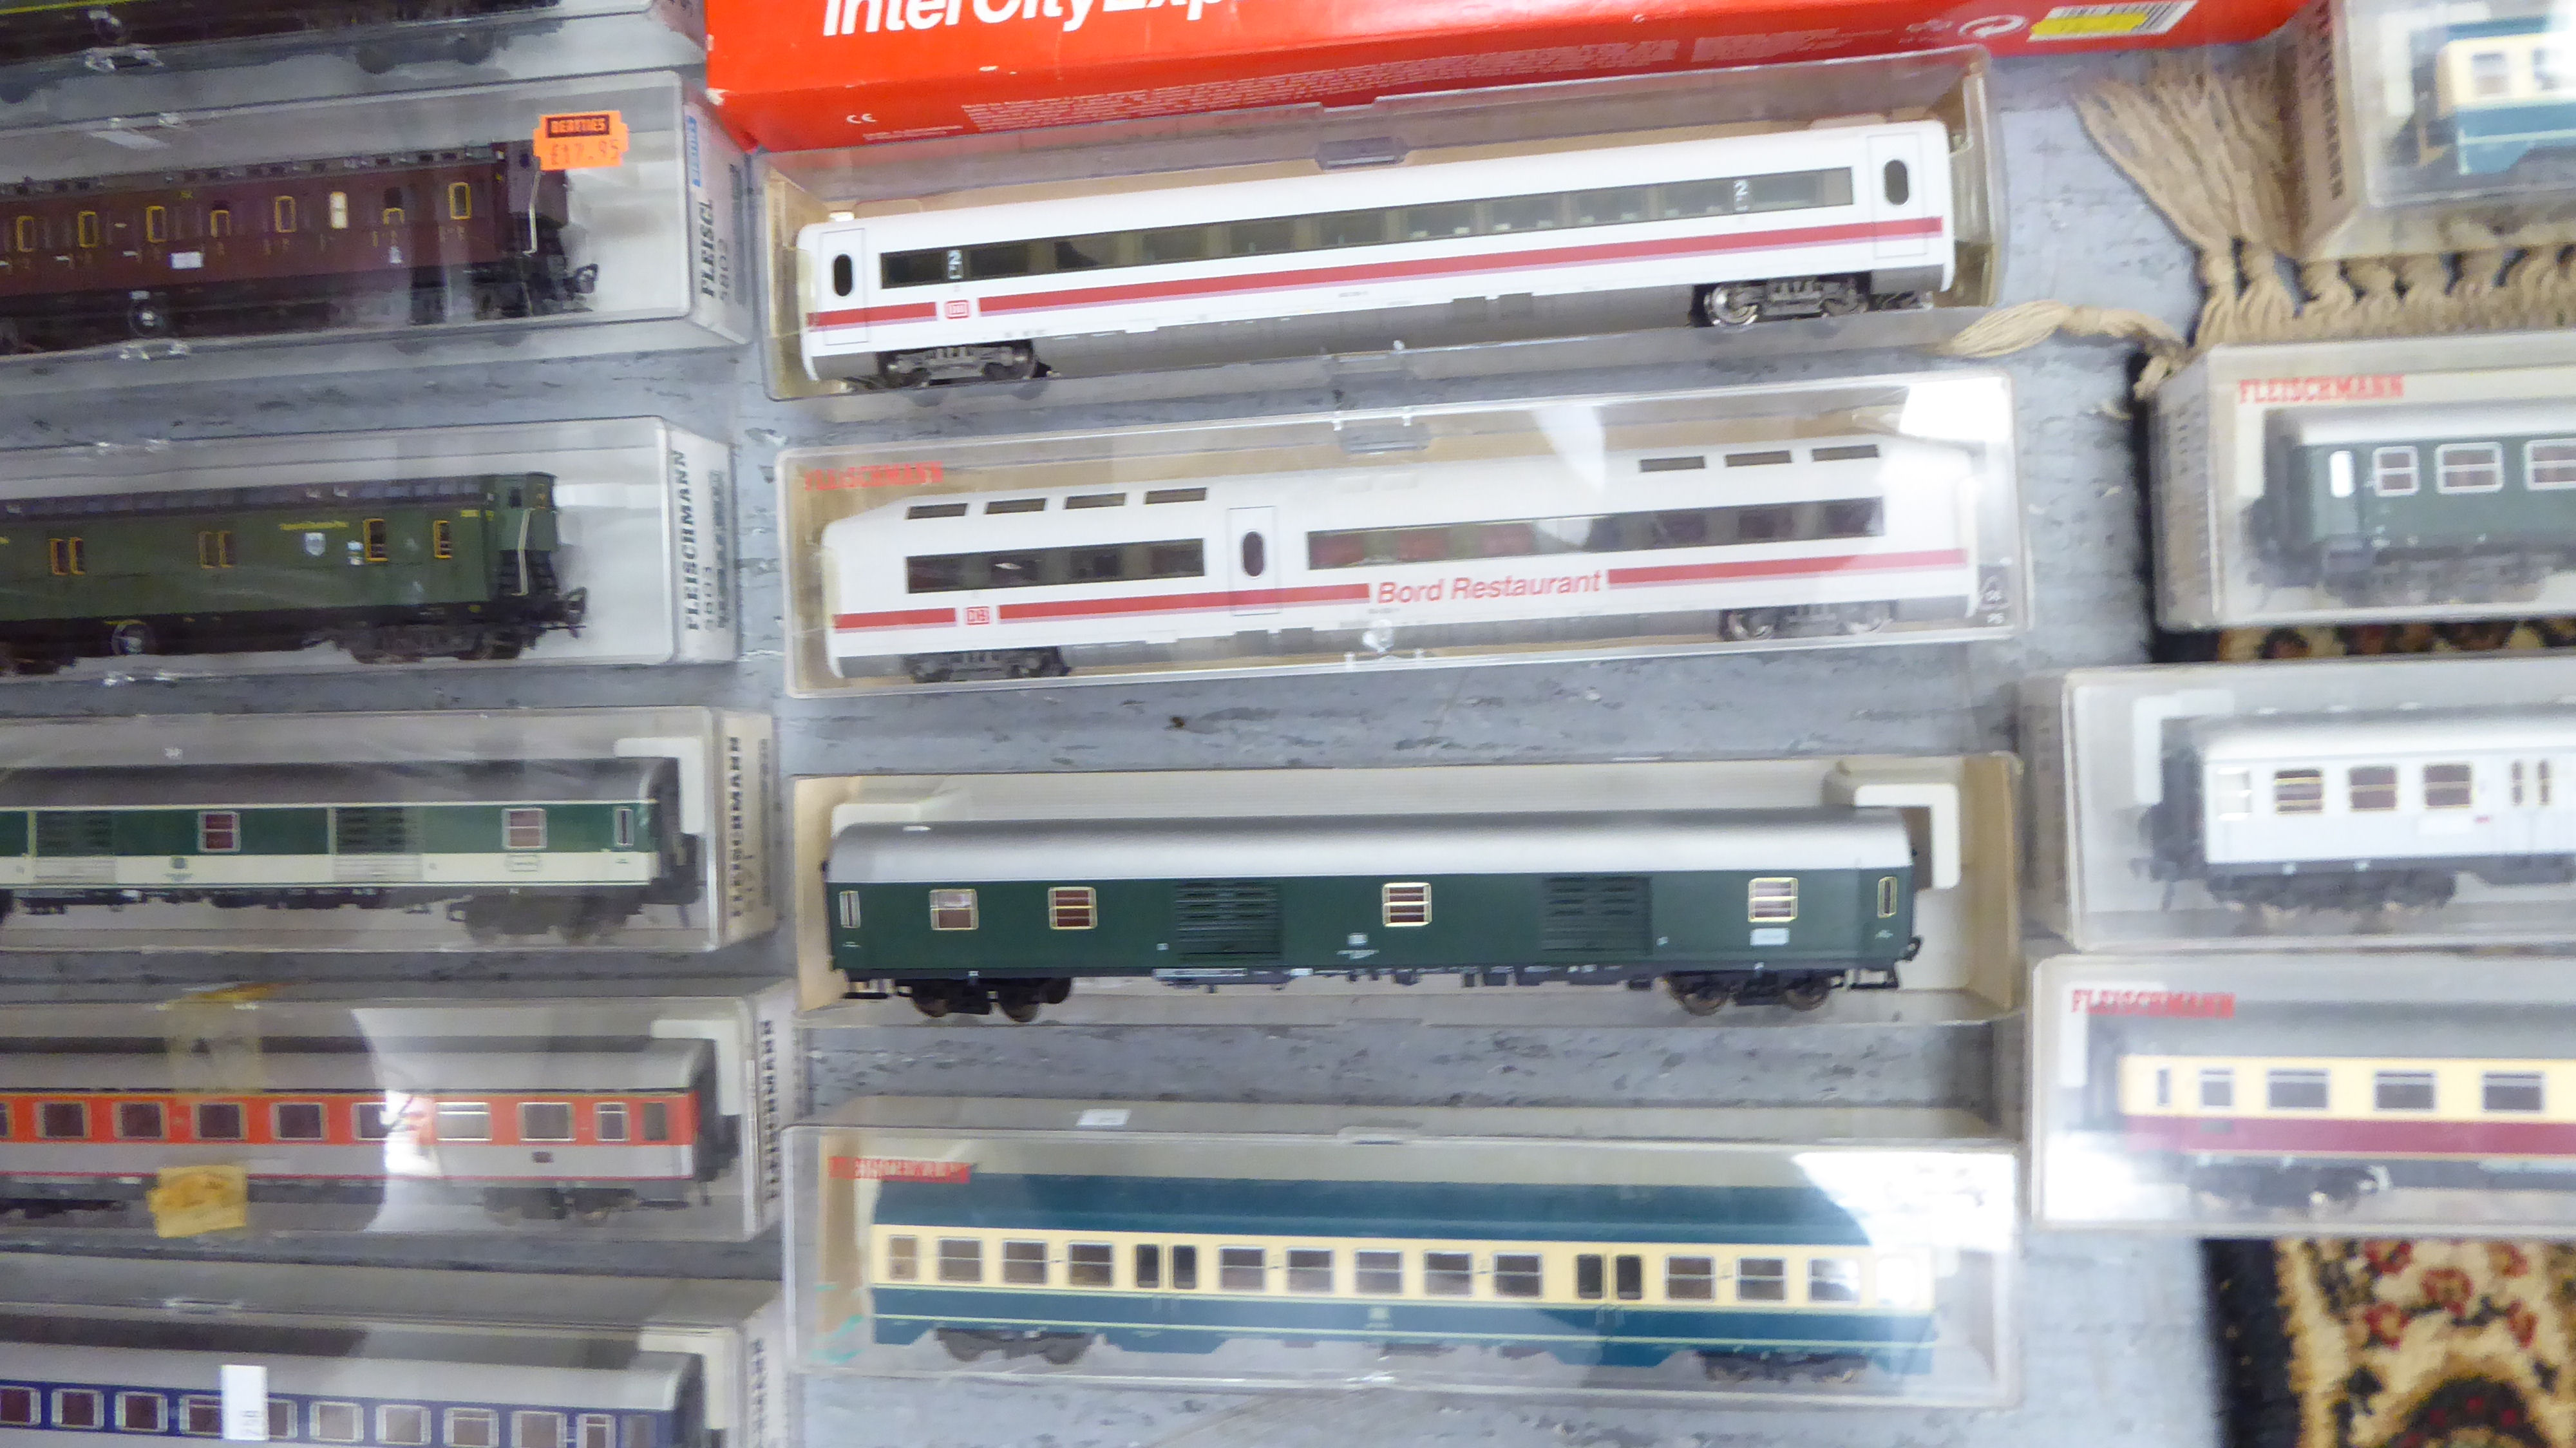 Fleischmann HO gauge model railway accessories: to include an Intercity Express and various coaches - Image 3 of 8